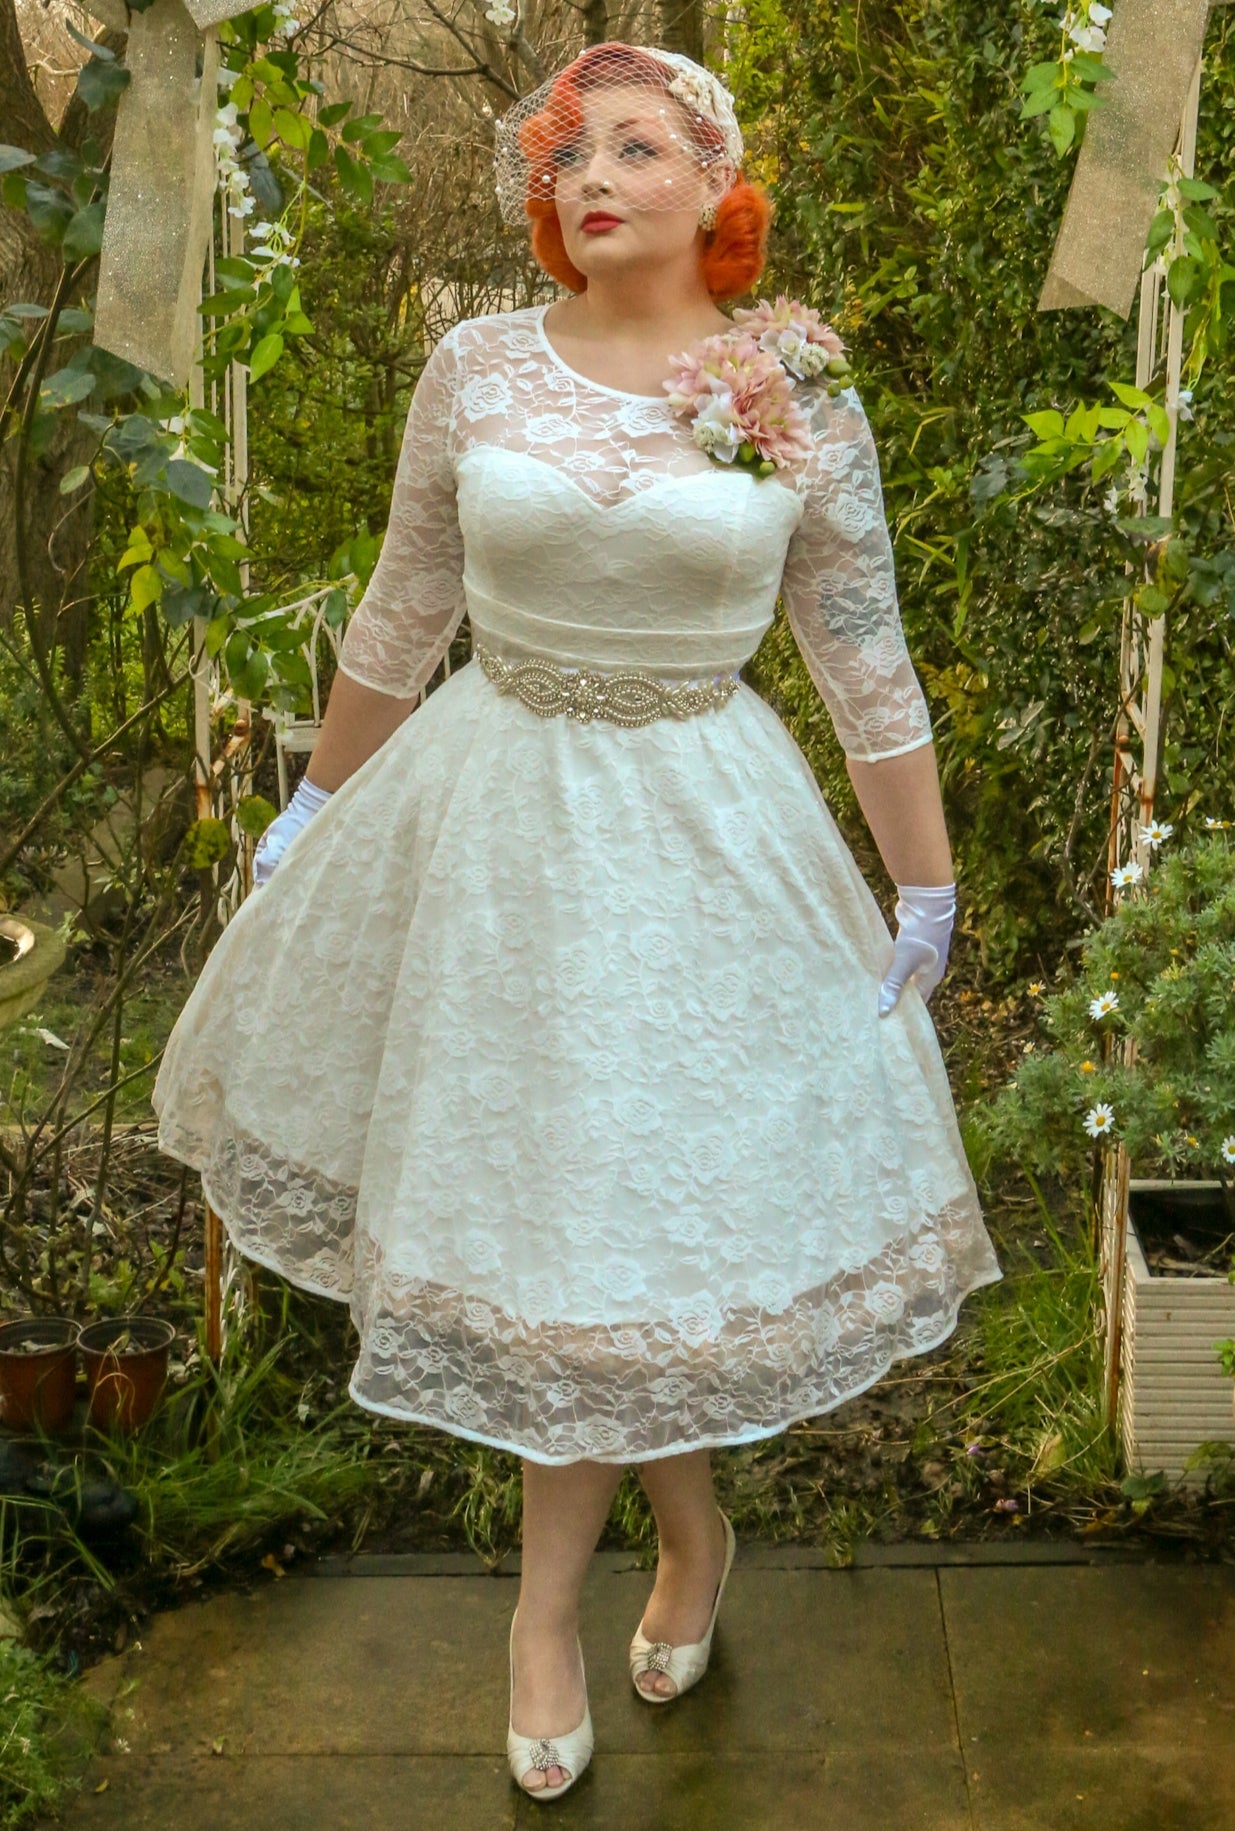 Customer wears our lace covered, sleeved vintage-style wedding dress